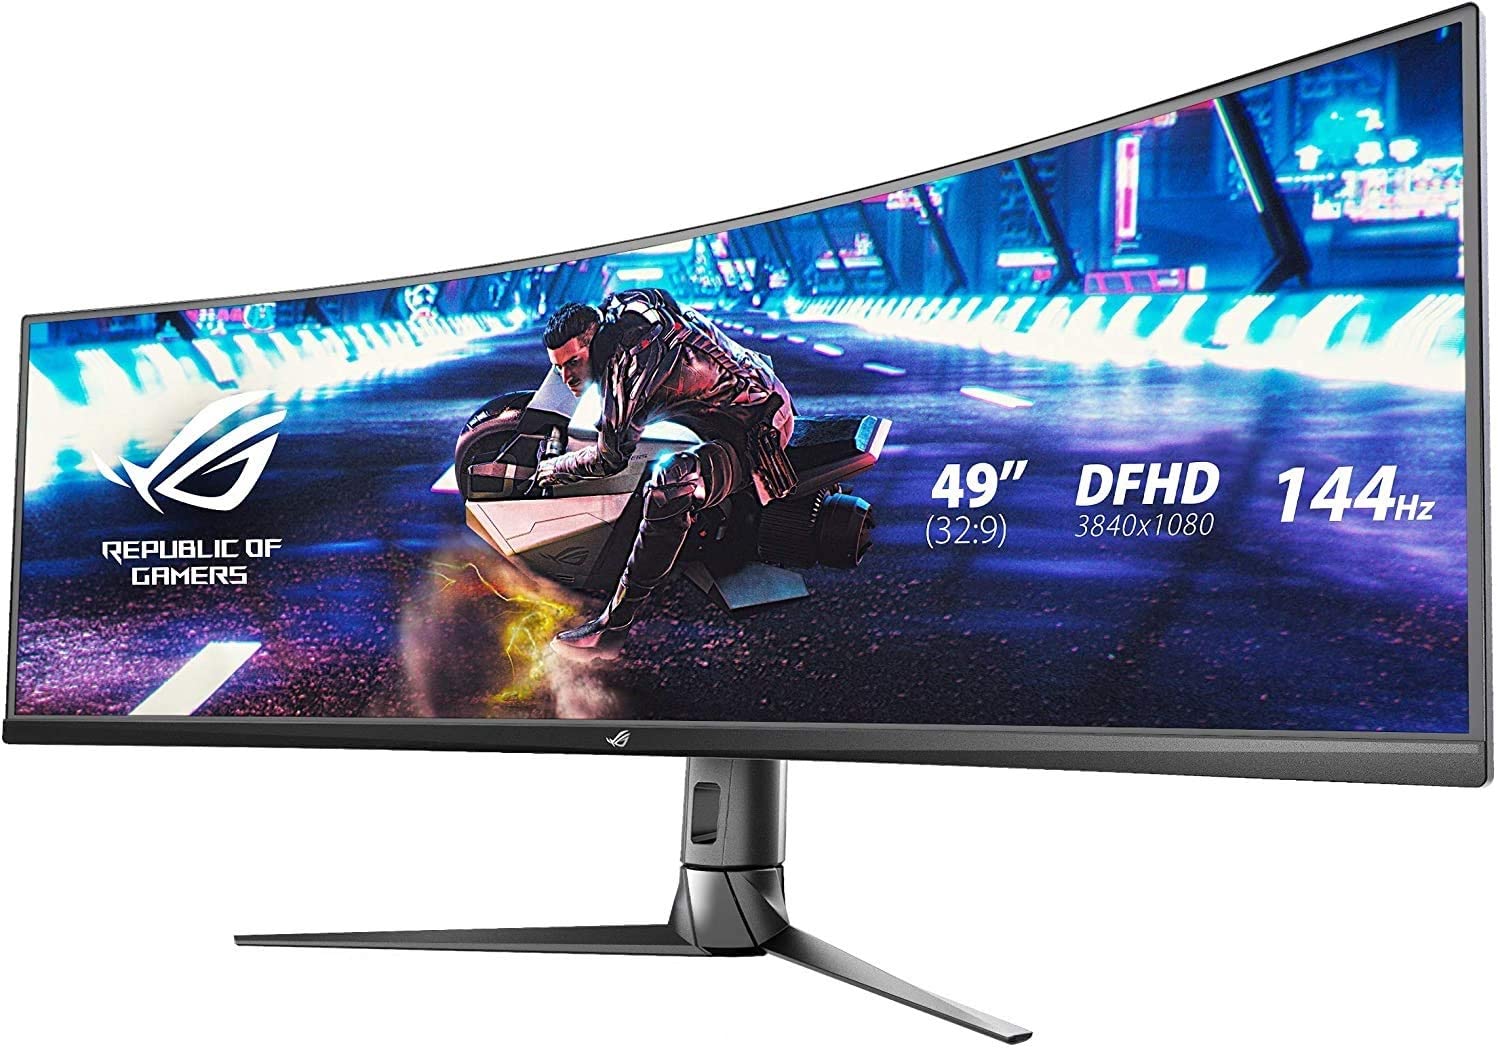 The 8 Best 49 inch Monitors in 2022